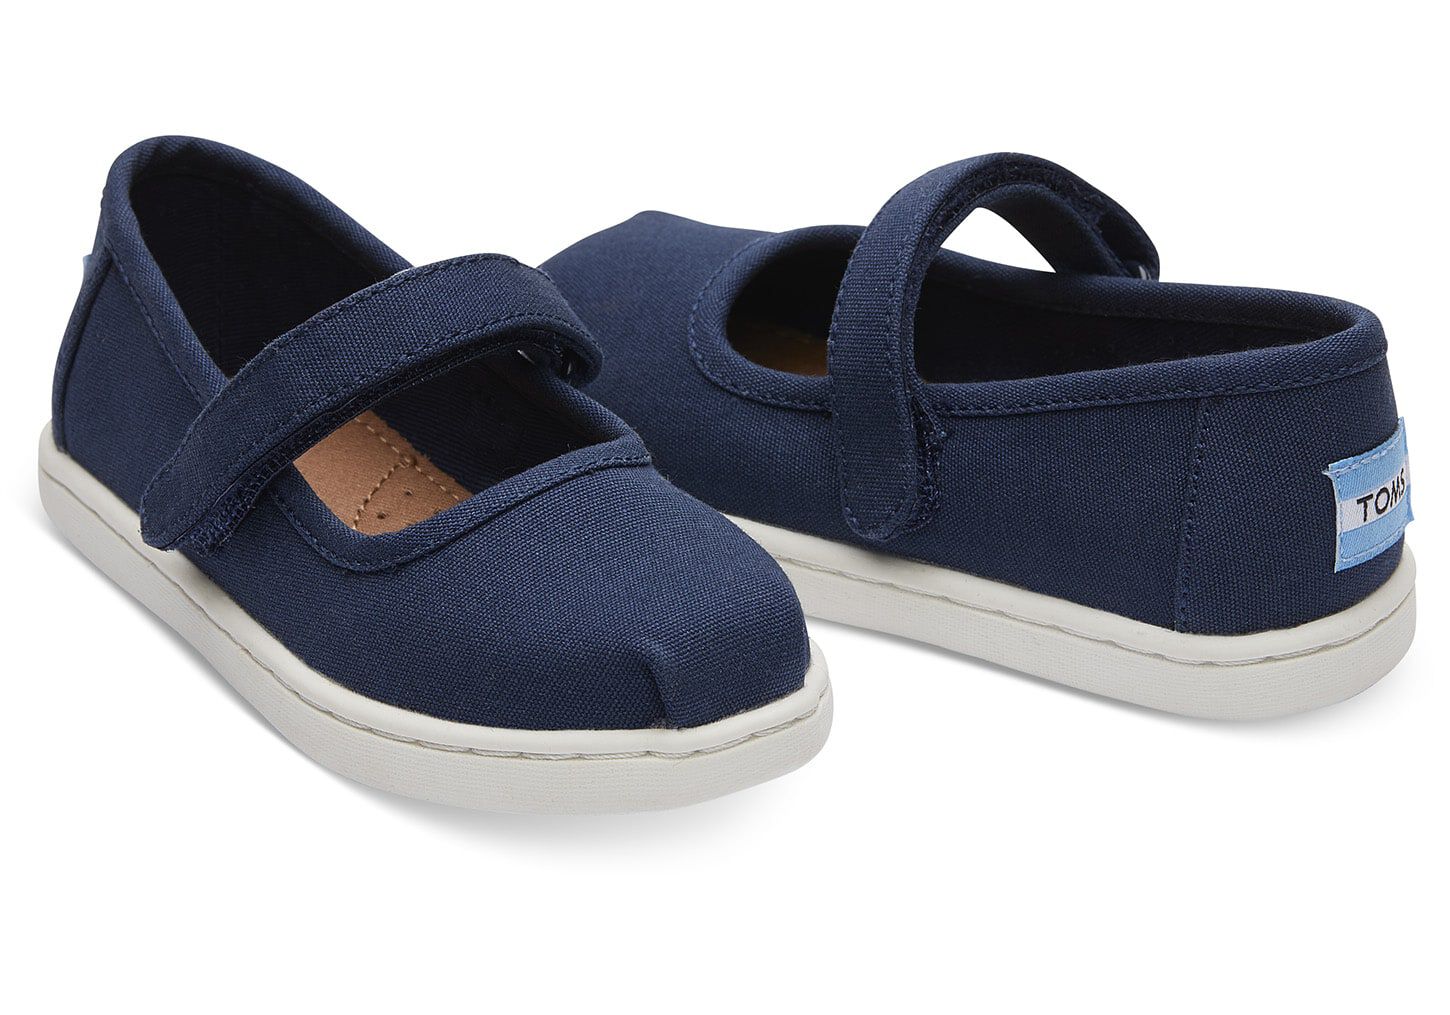 Kids' Shoes for Girls | TOMS